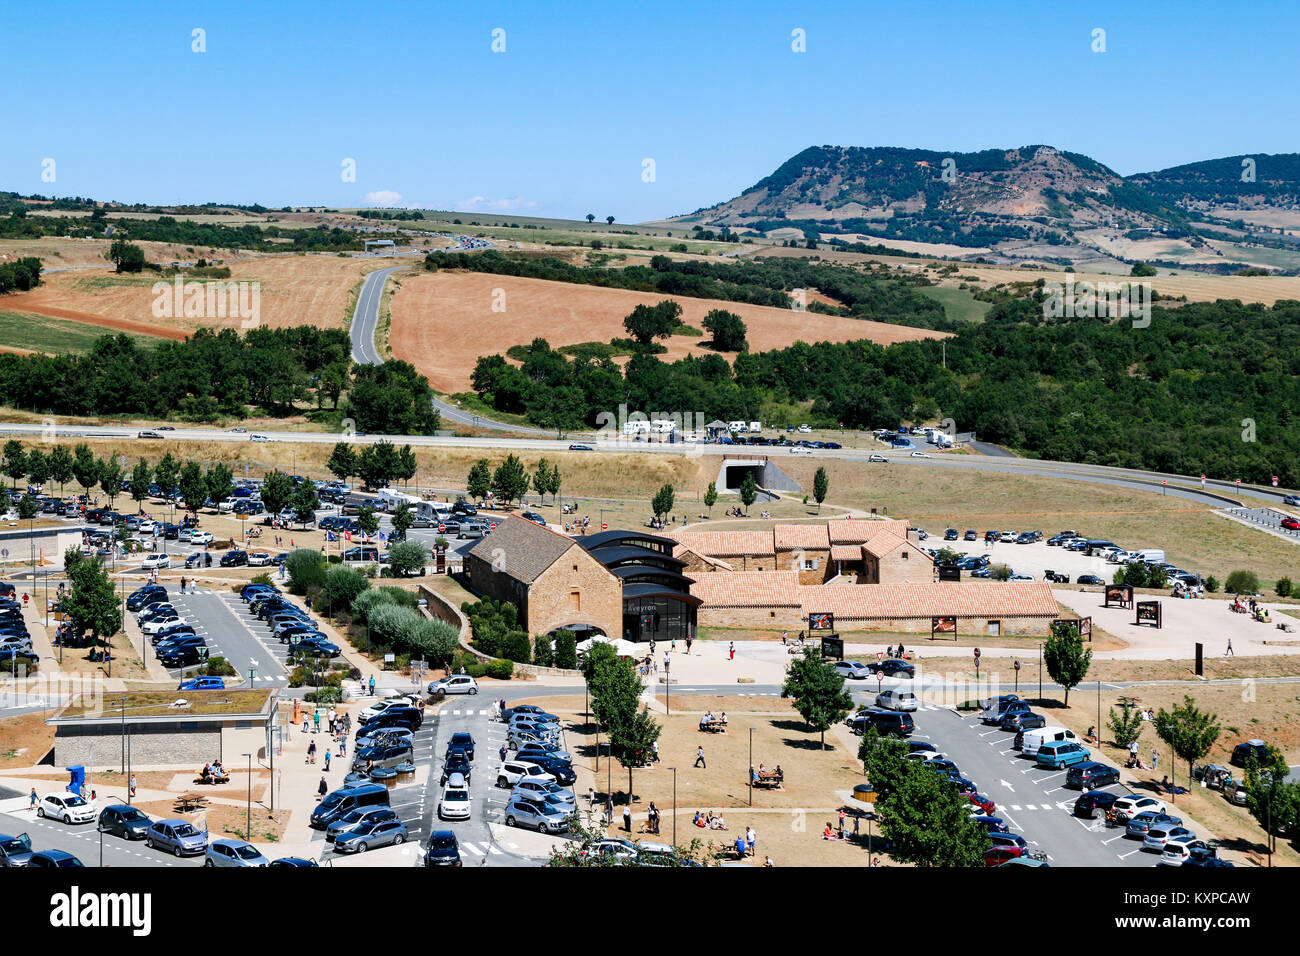 High view over the Visitor Centre at Millau Viaduct, Aveyron, France. The tallest bridge in the world, designed by Norman Foster. Stock Photo